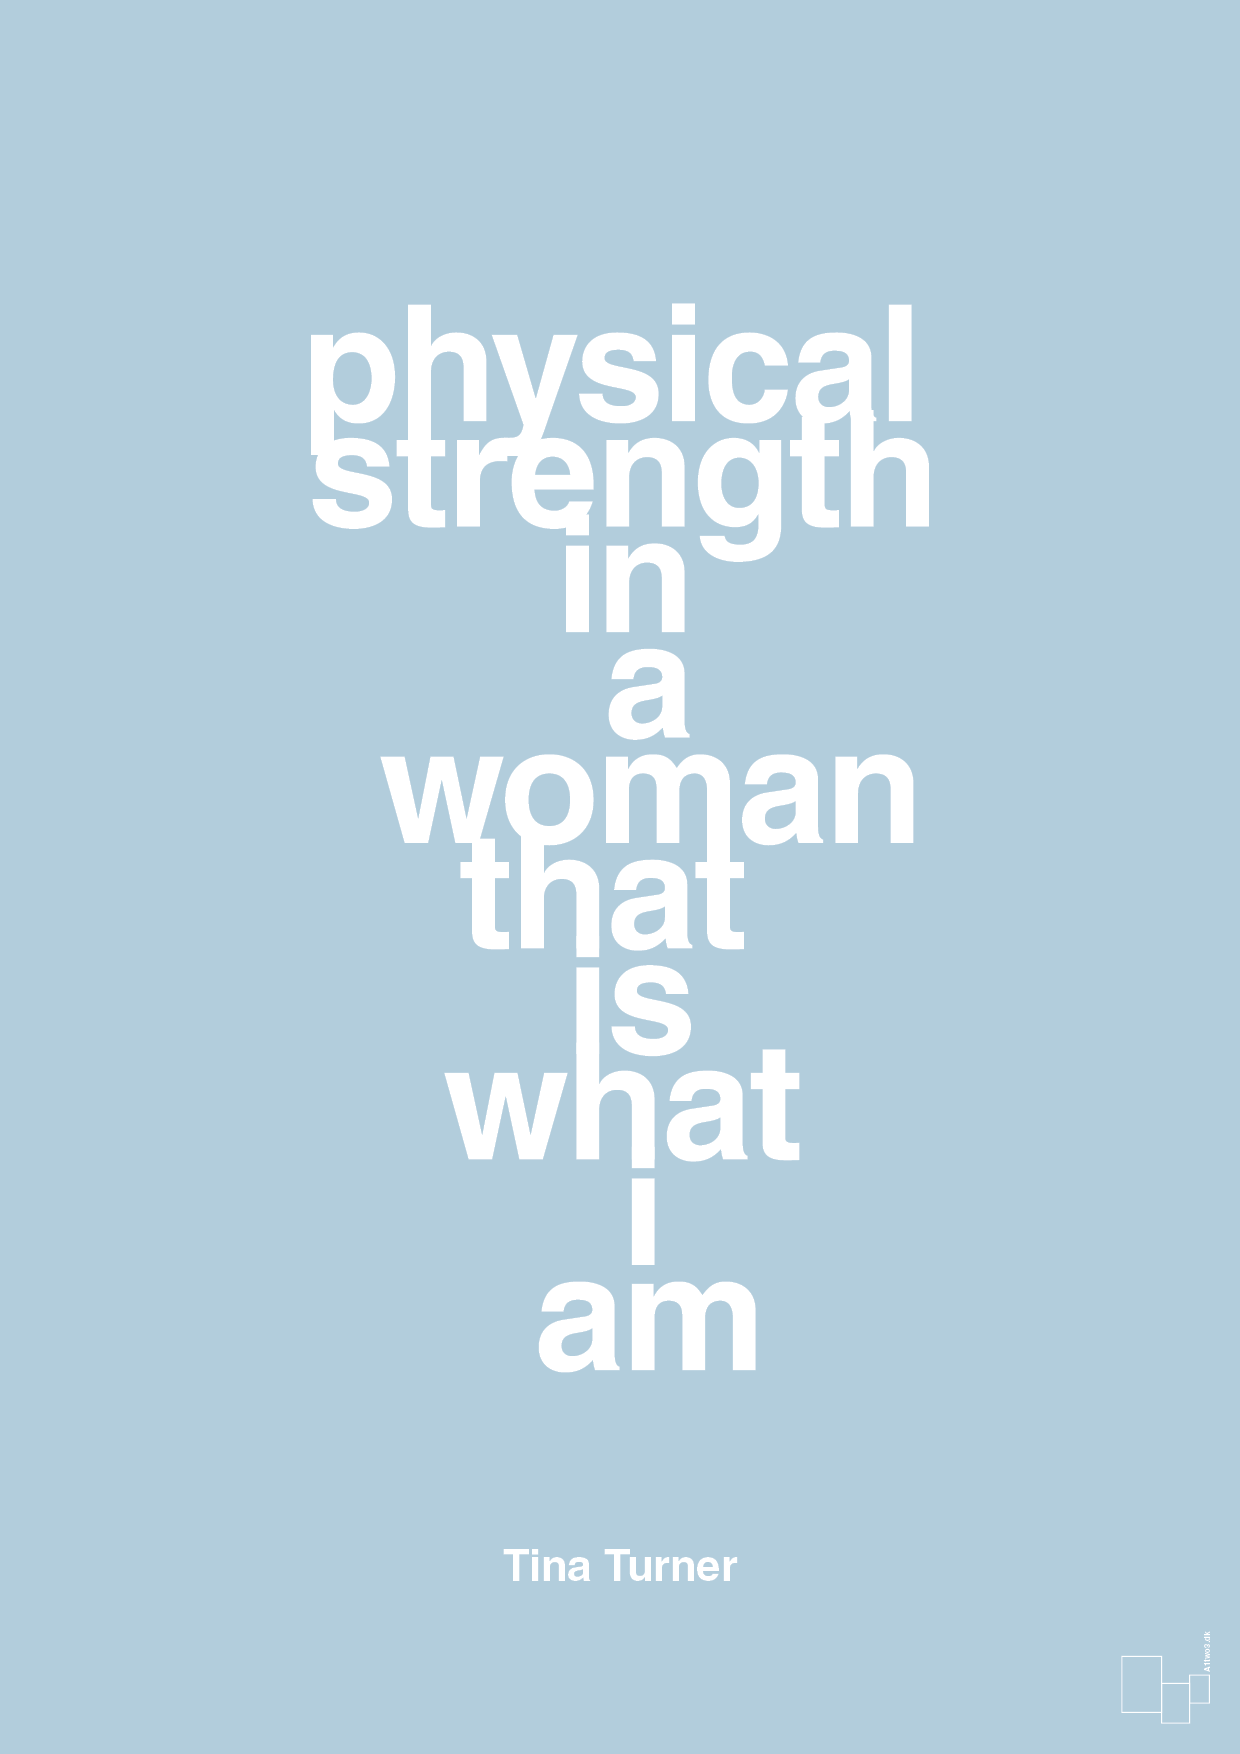 physical strength in a woman that’s what I am - Plakat med Citater i Heavenly Blue